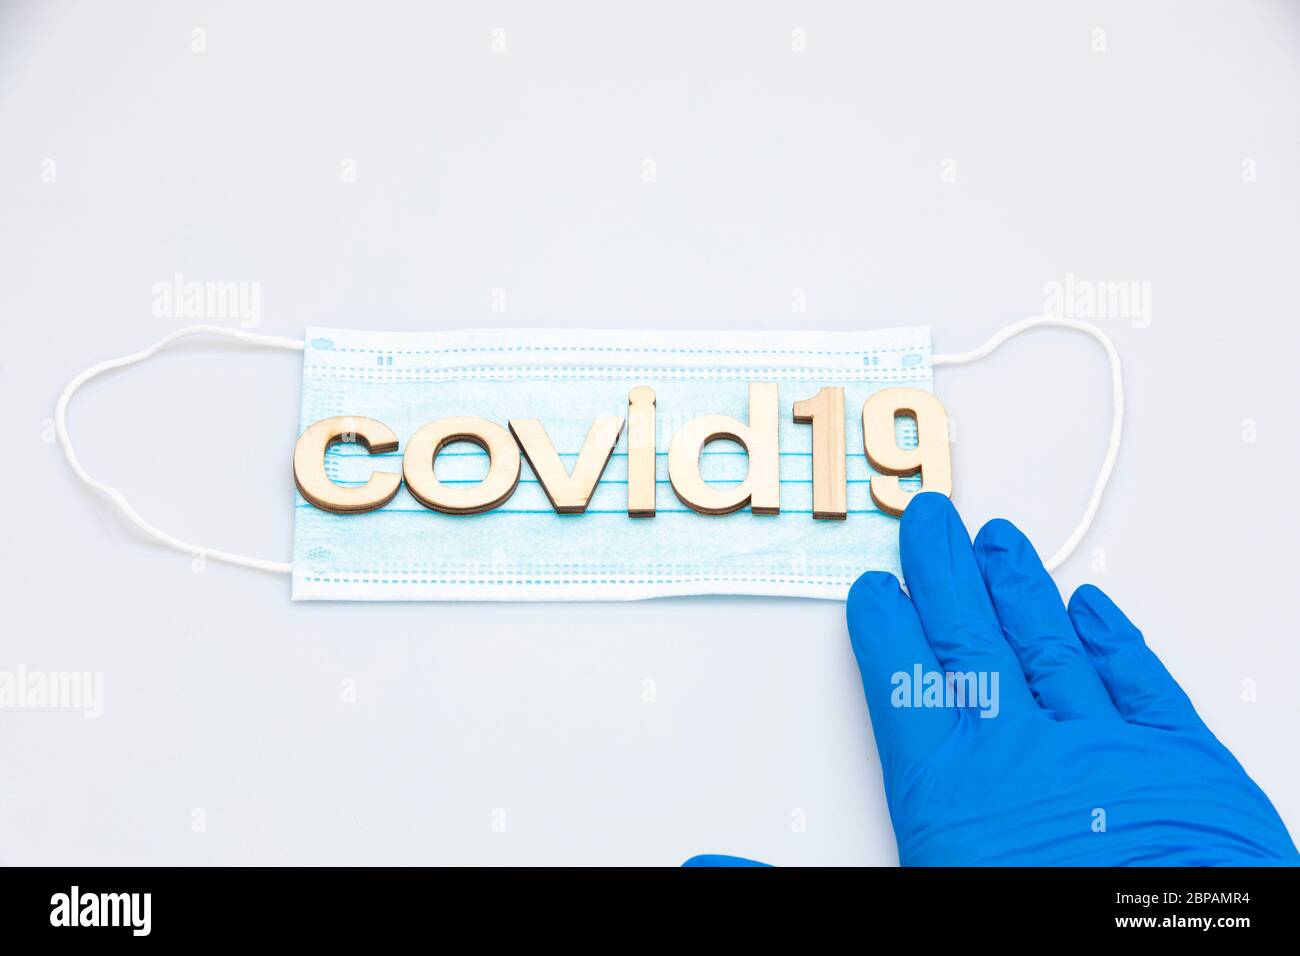 hand with a blue surgical glove holding the last part of the word covid19 formed with letters placed on a surgical mask isolated on a white background Stock Photo